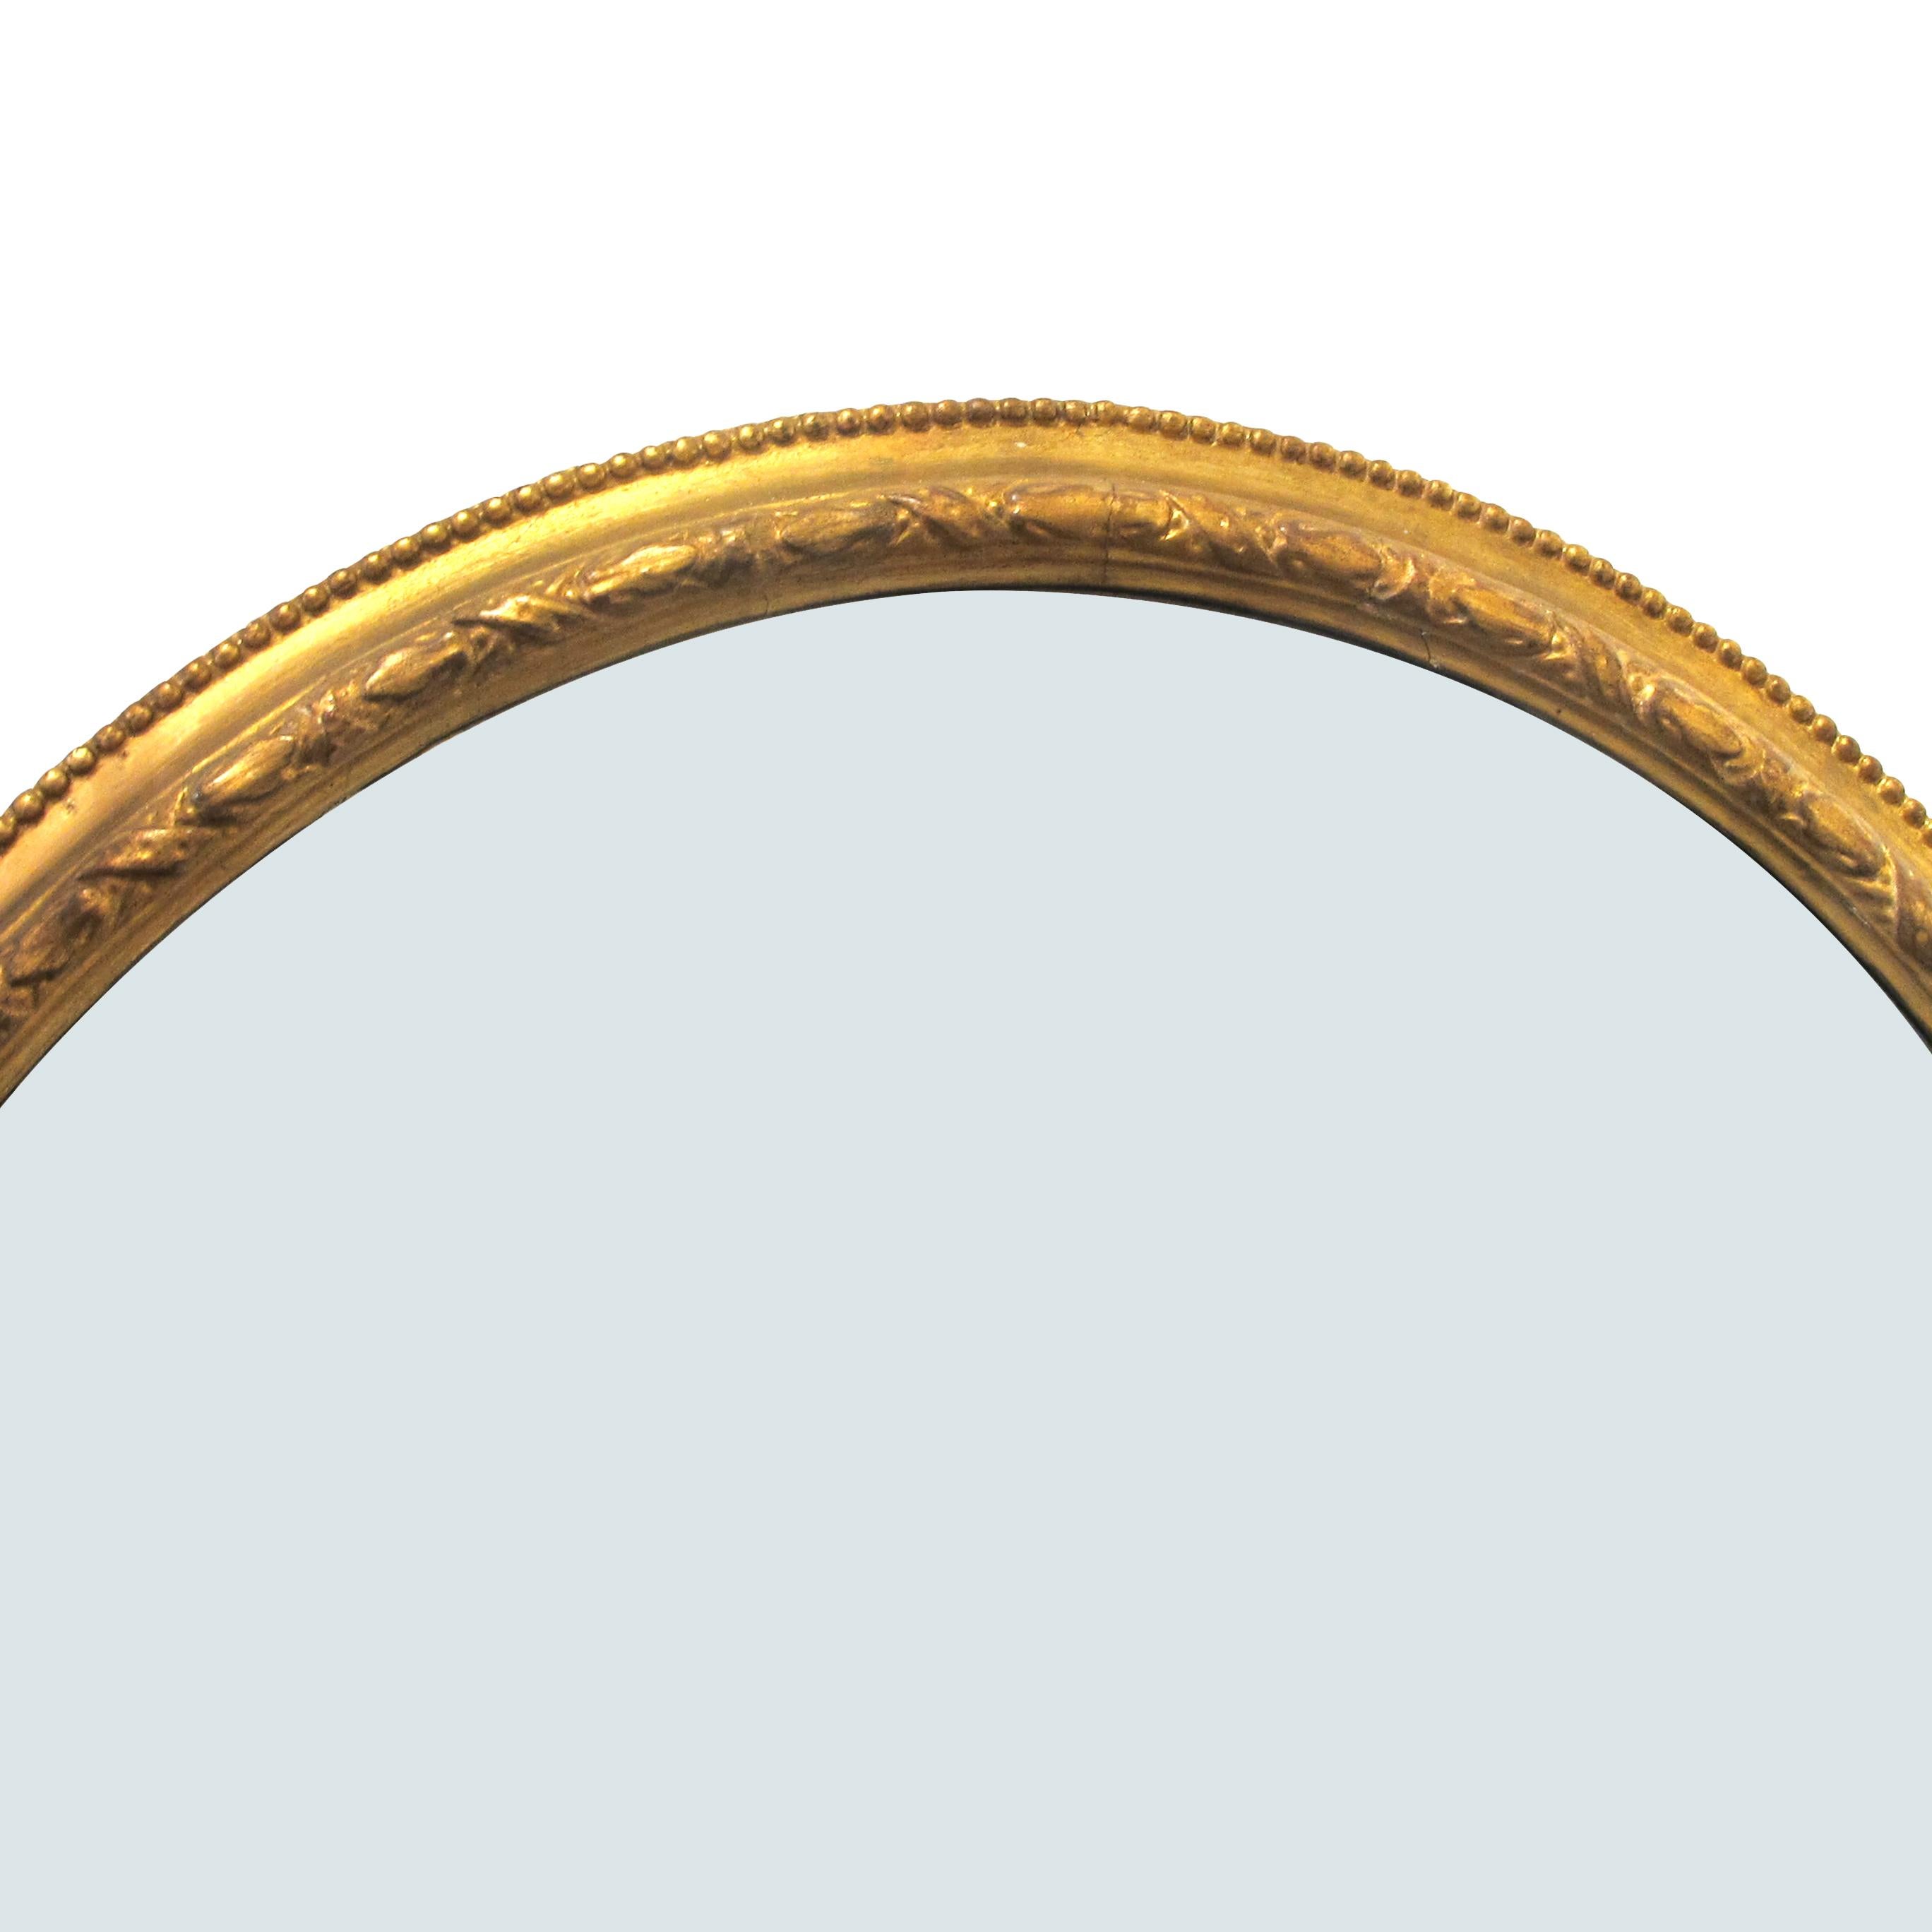 British 1790s Georgian Large Oval Mirror with Gilt Wood Frame, English  For Sale